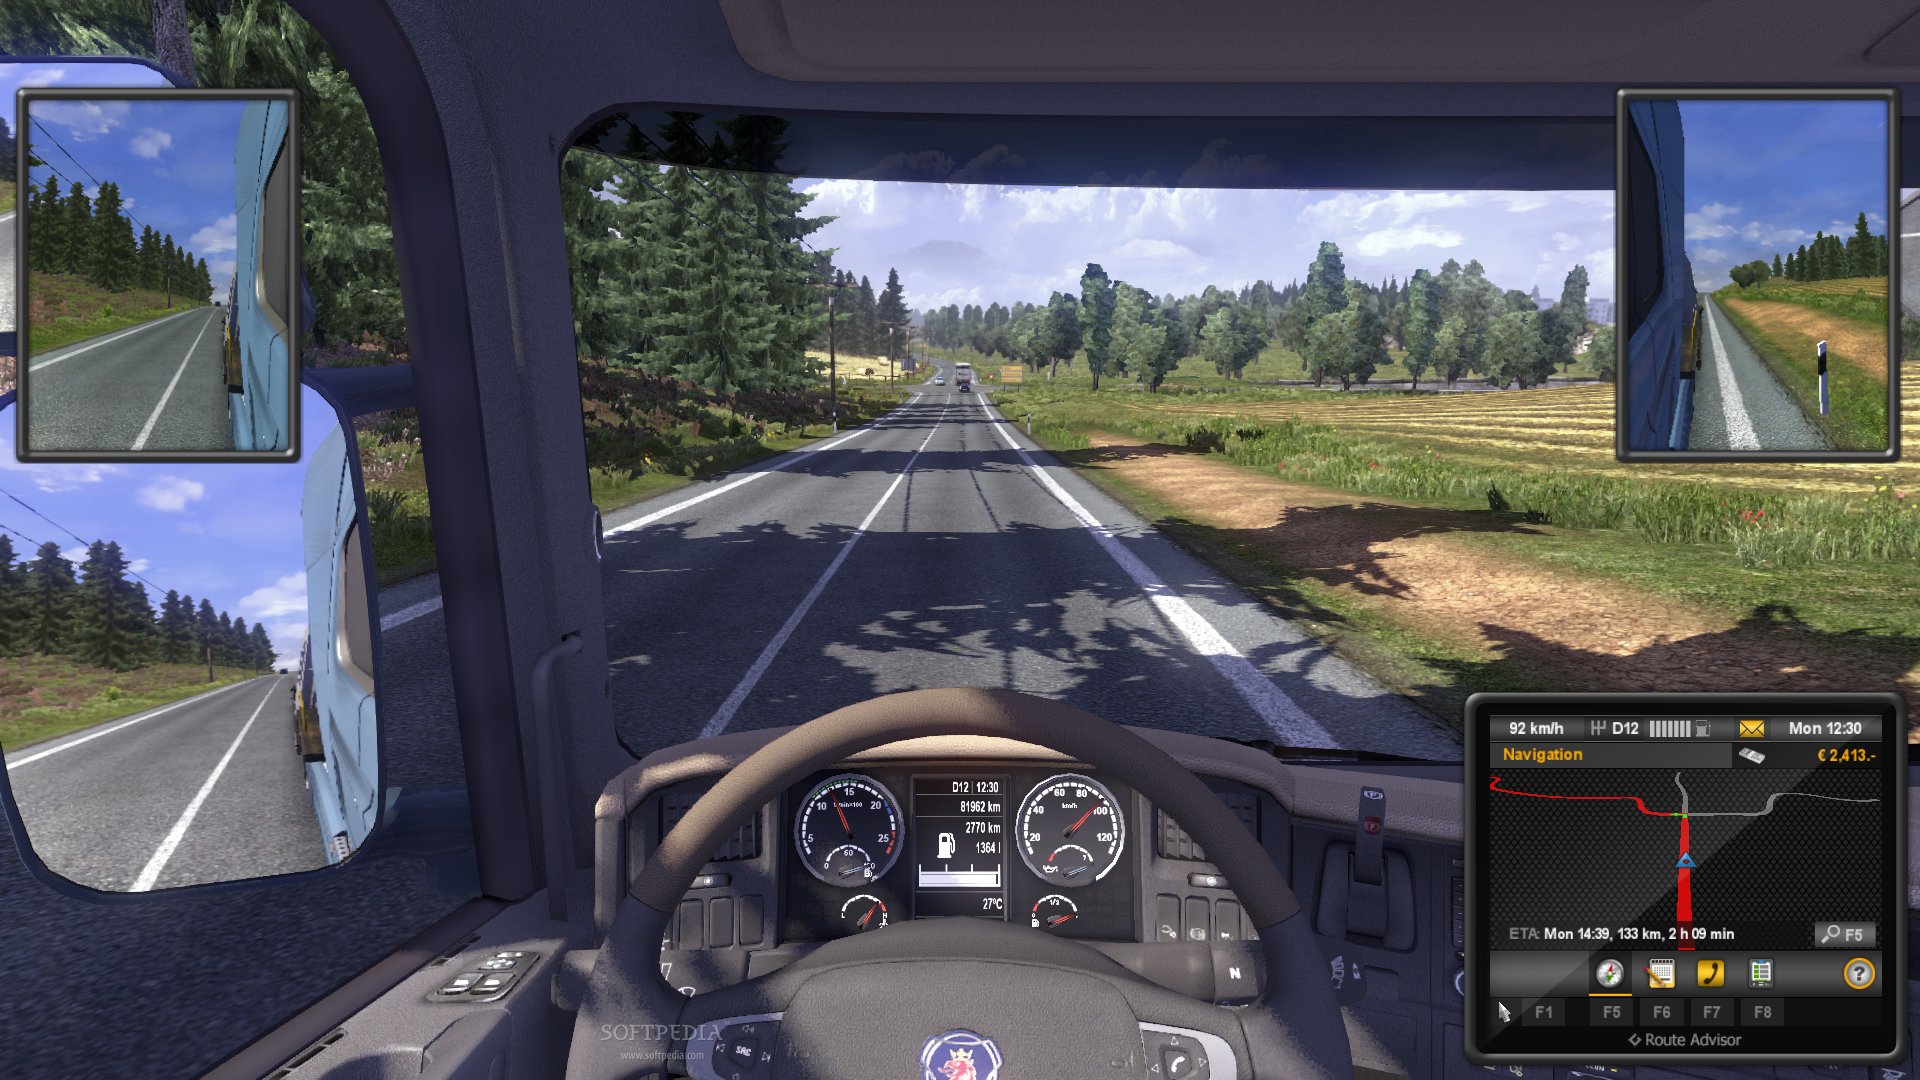 Euro truck simulator 2 full version free download with key